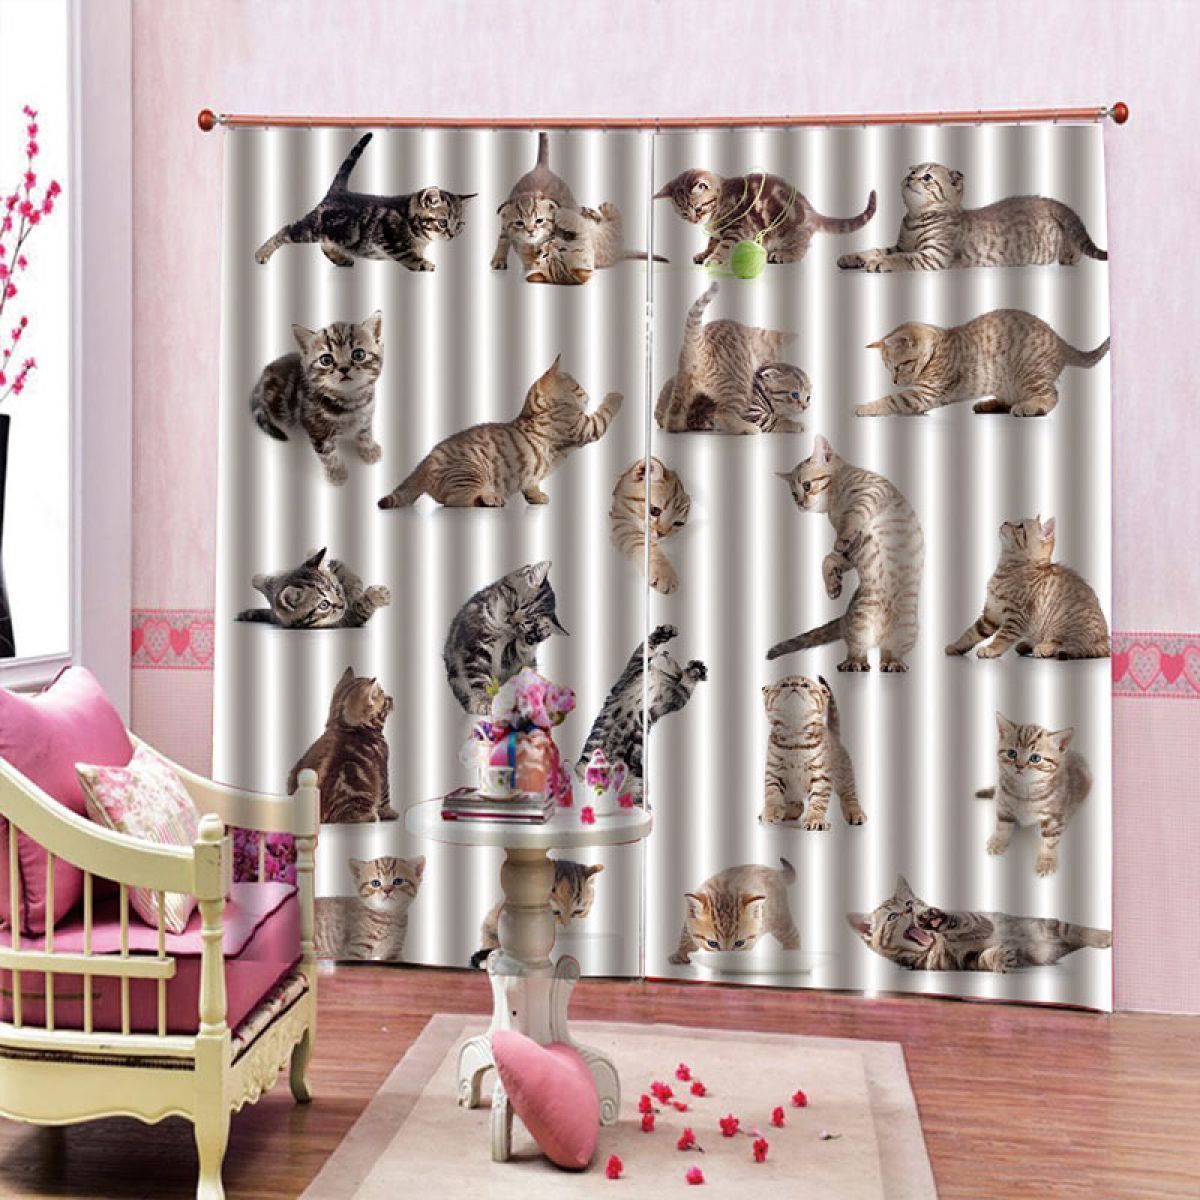 3d cat hanging printed window curtain home decor 7458